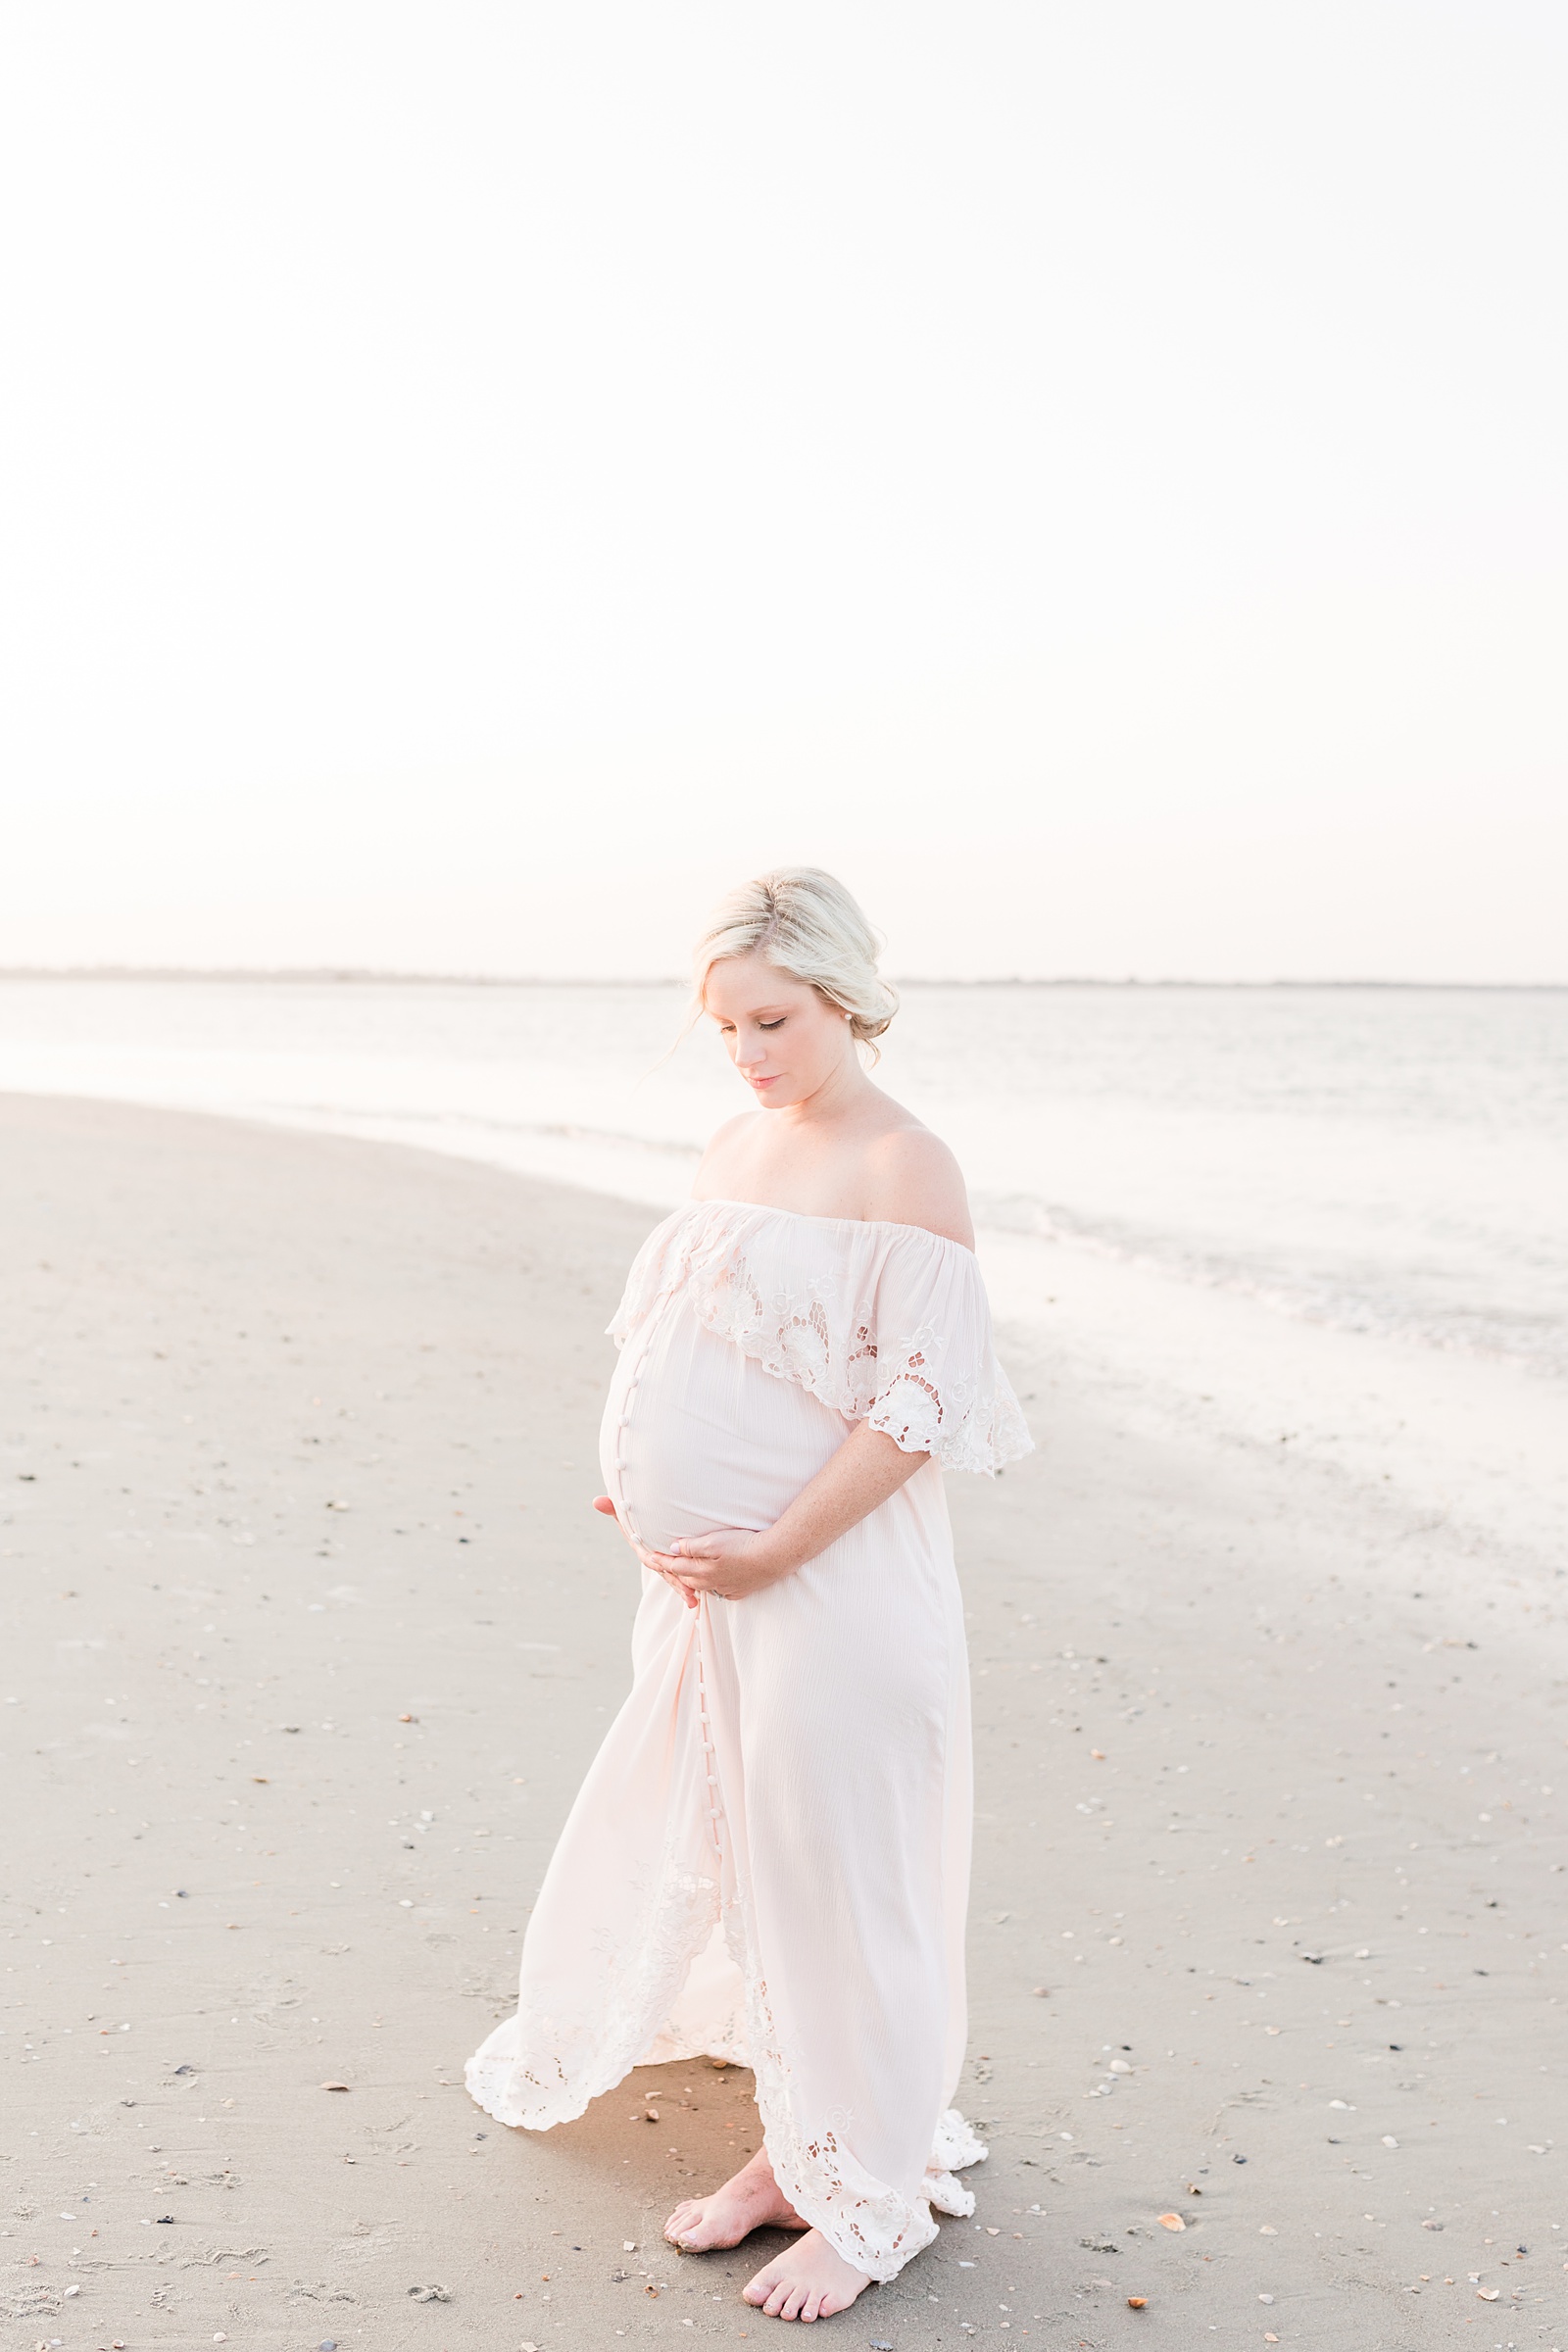 Sunset beach maternity session with mom in blush maxi dress by Caitlyn Motycka Photography